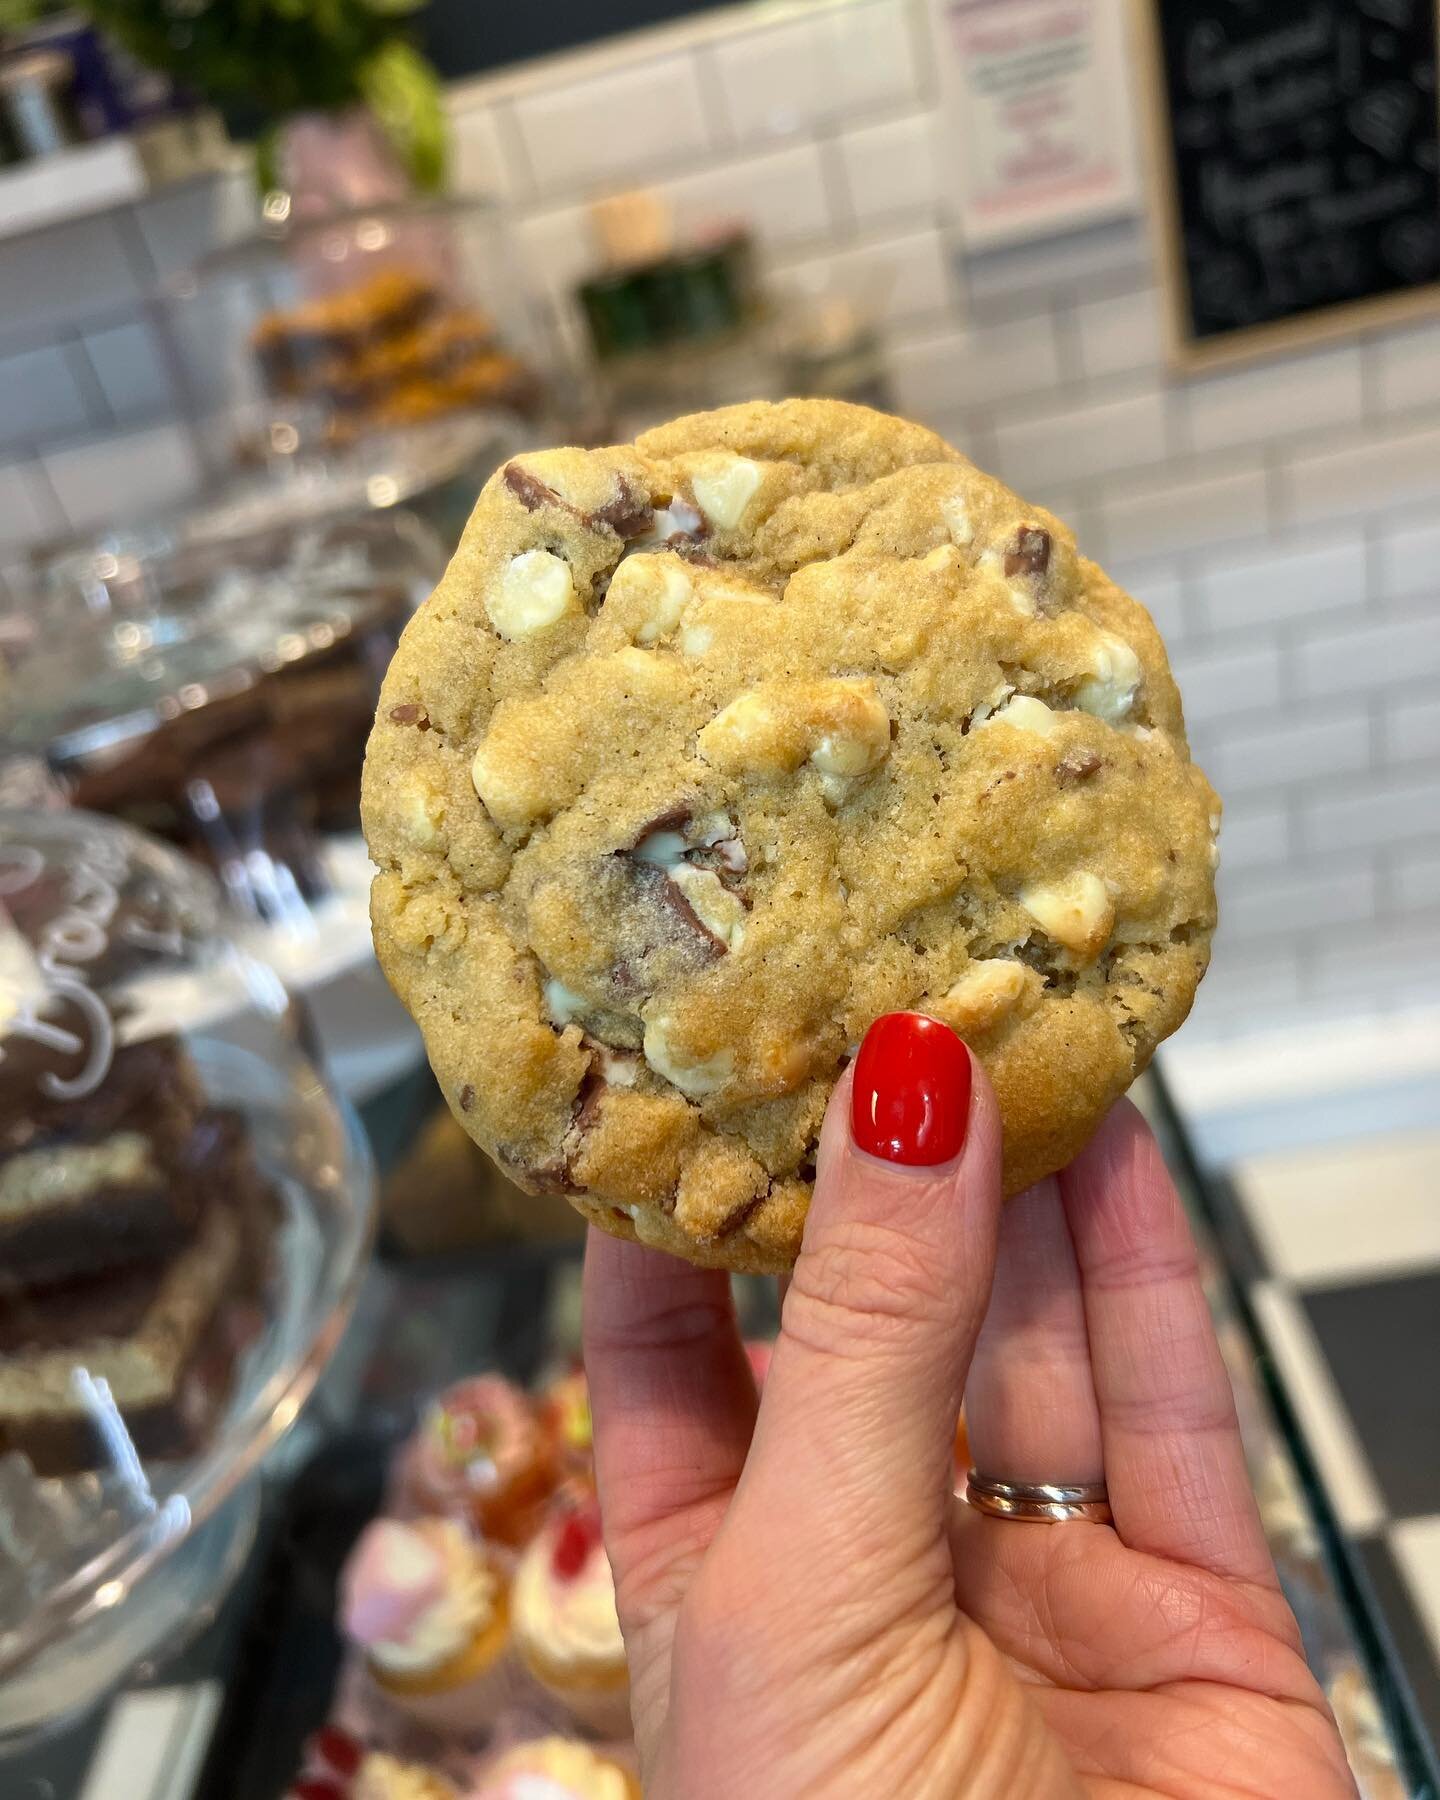 Have you tried our cookies yet?? 🍪